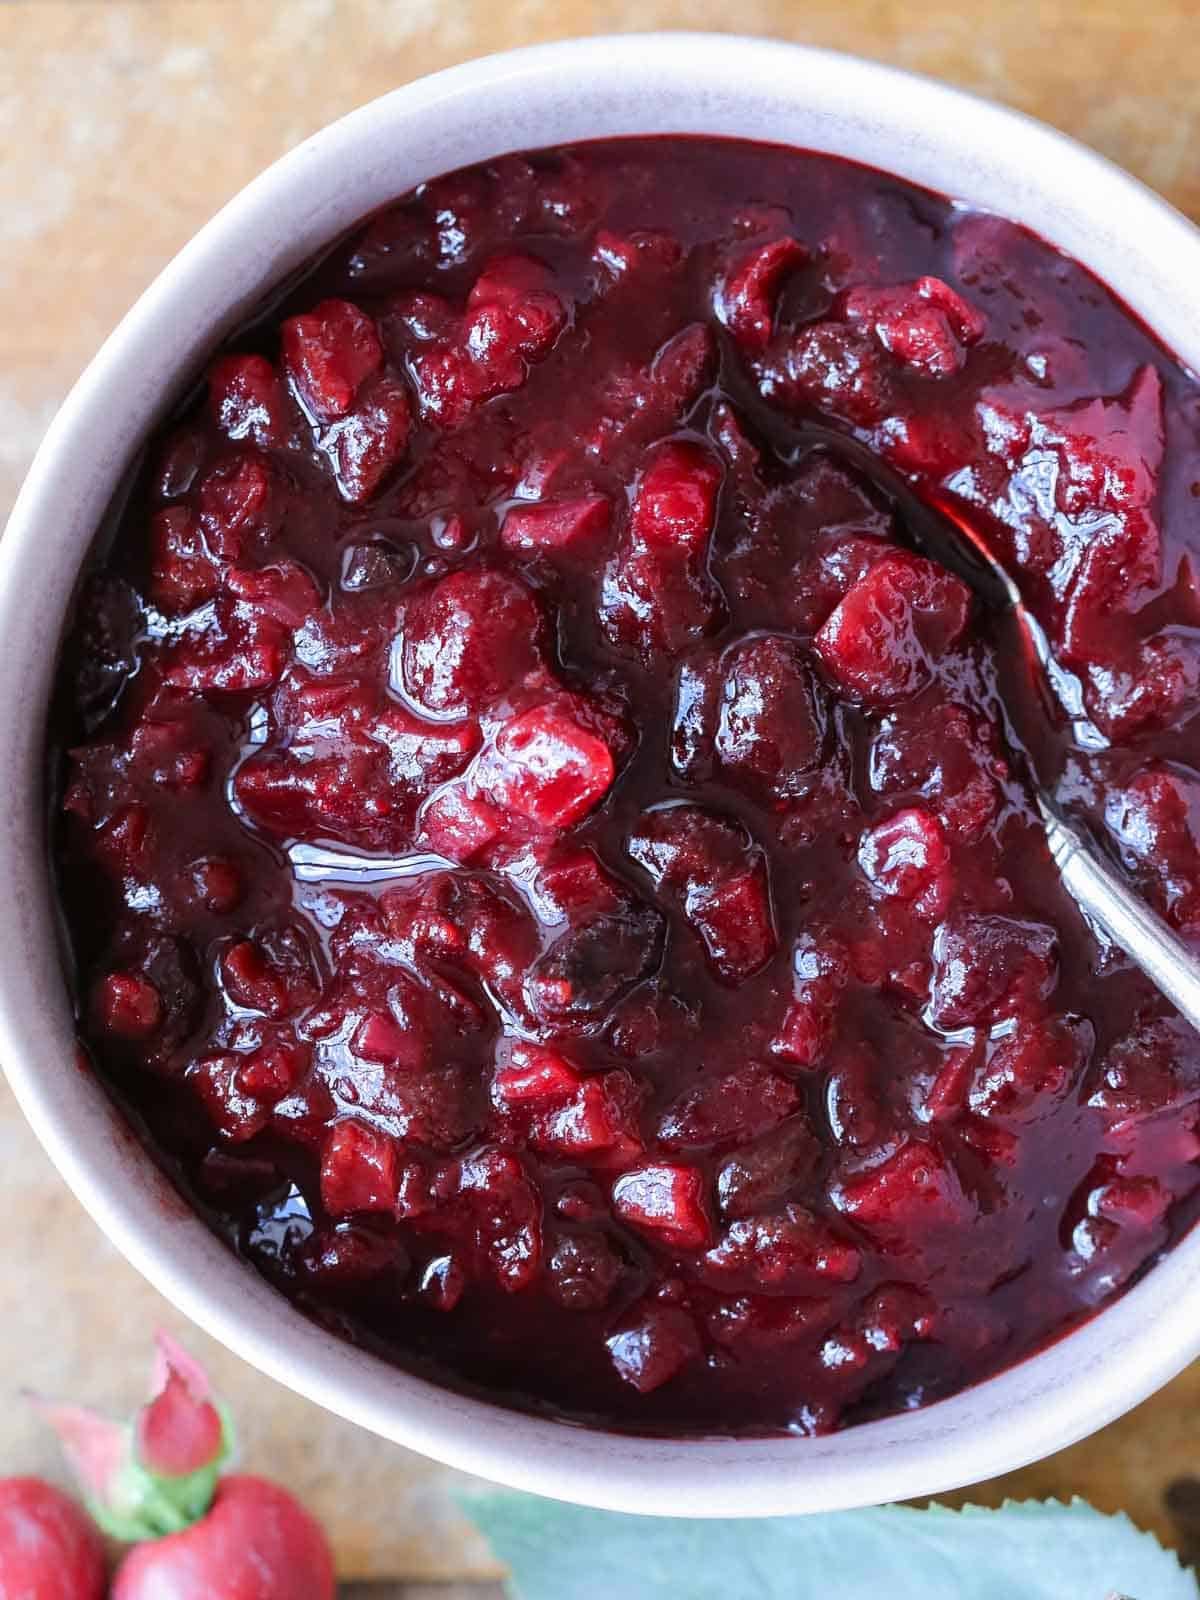 easy thanksgiving dinner recipe for cranberry chutney in bowl on wooden surface.